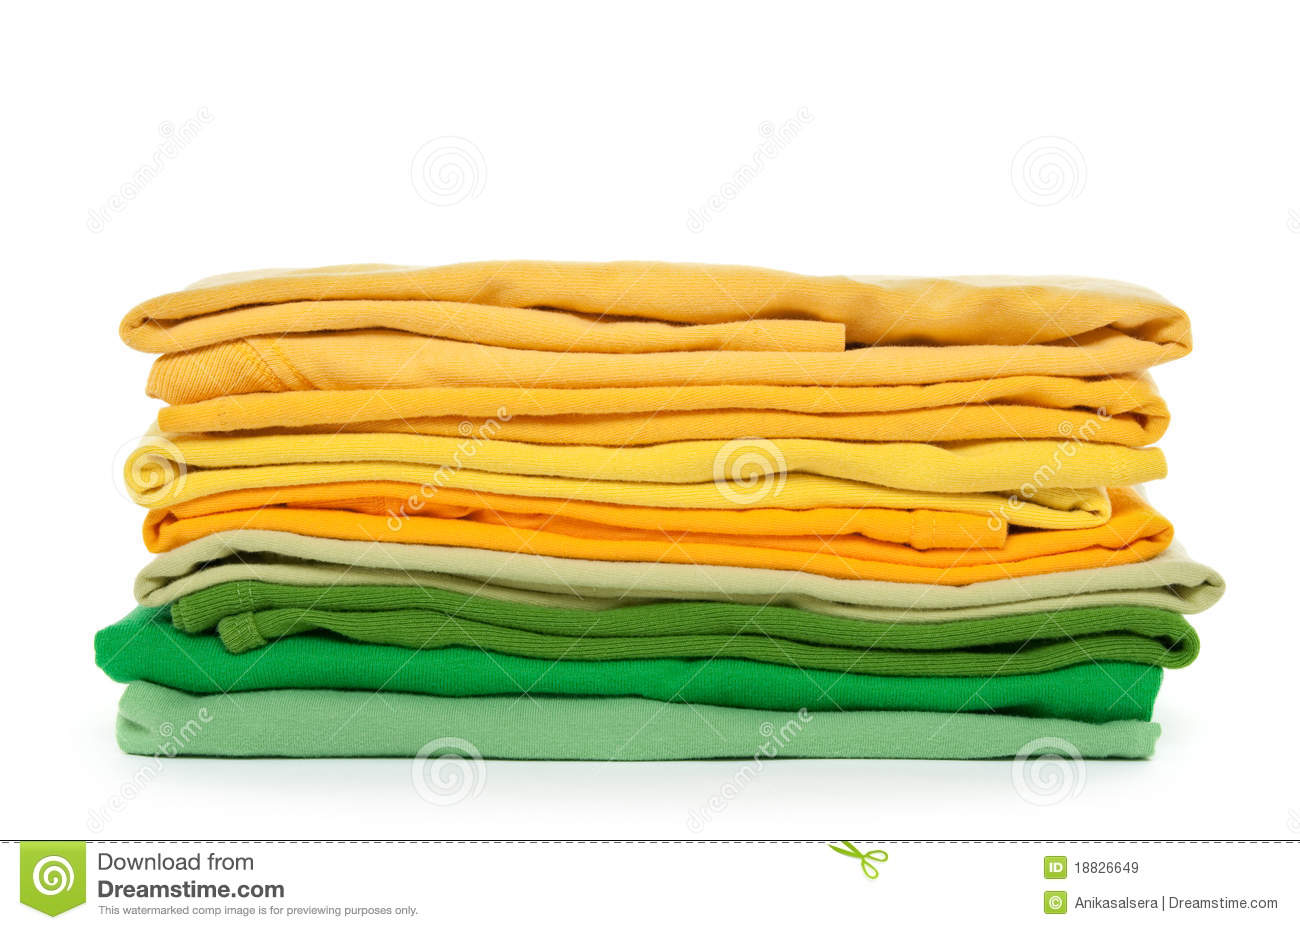 Green And Yellow Folded Clothes Royalty Free Stock Images   Image